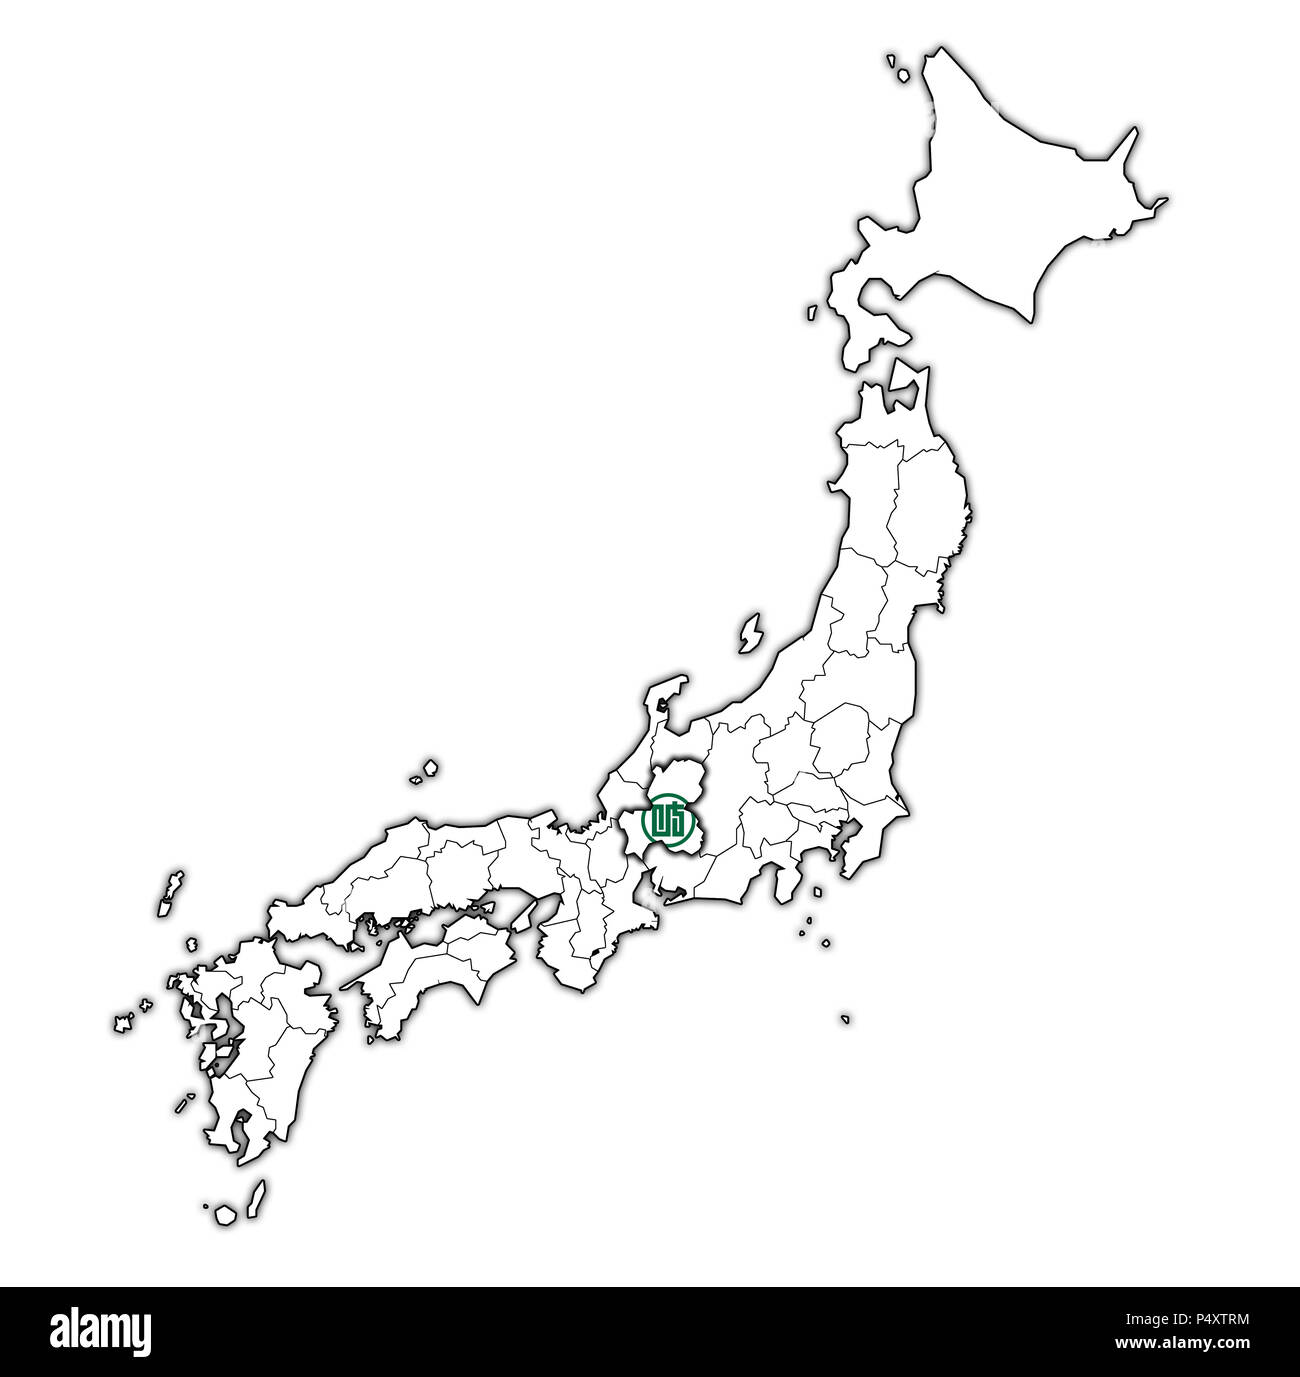 flag of gifu prefecture on map with administrative divisions and borders of japan Stock Photo